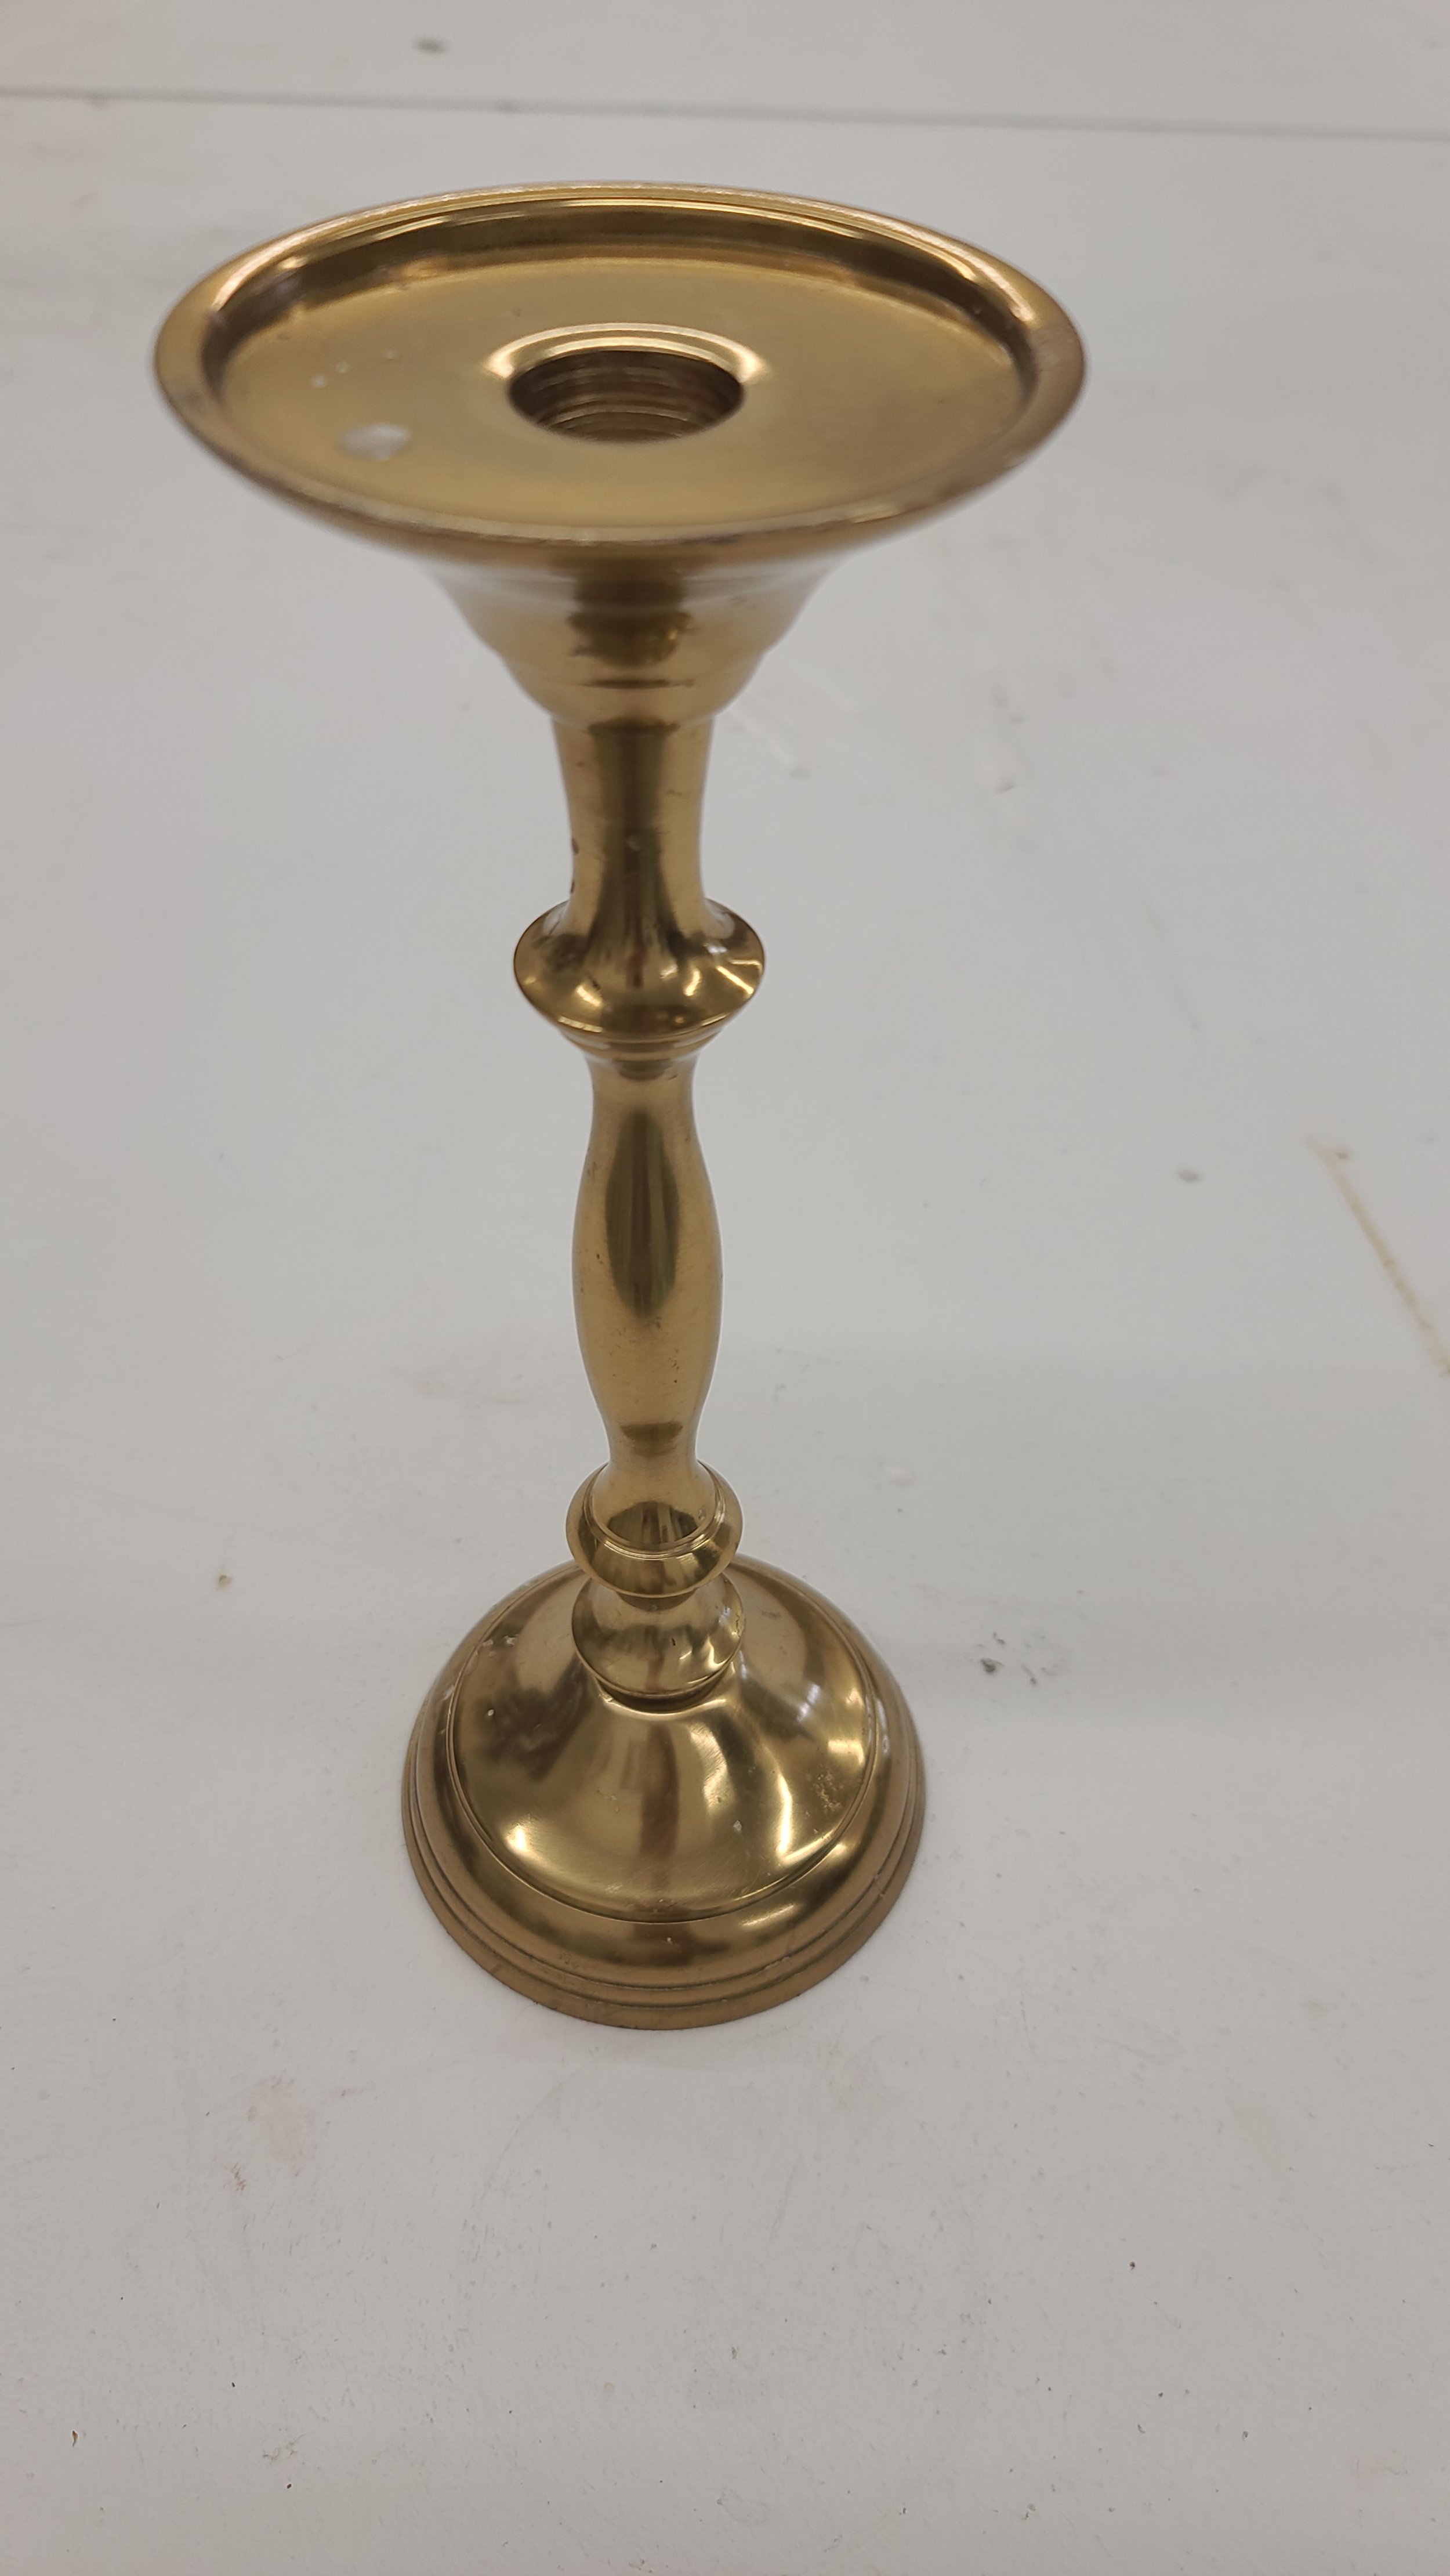 Gold Taper Candle Holder (4) - $3 (or $5 with LED candle)